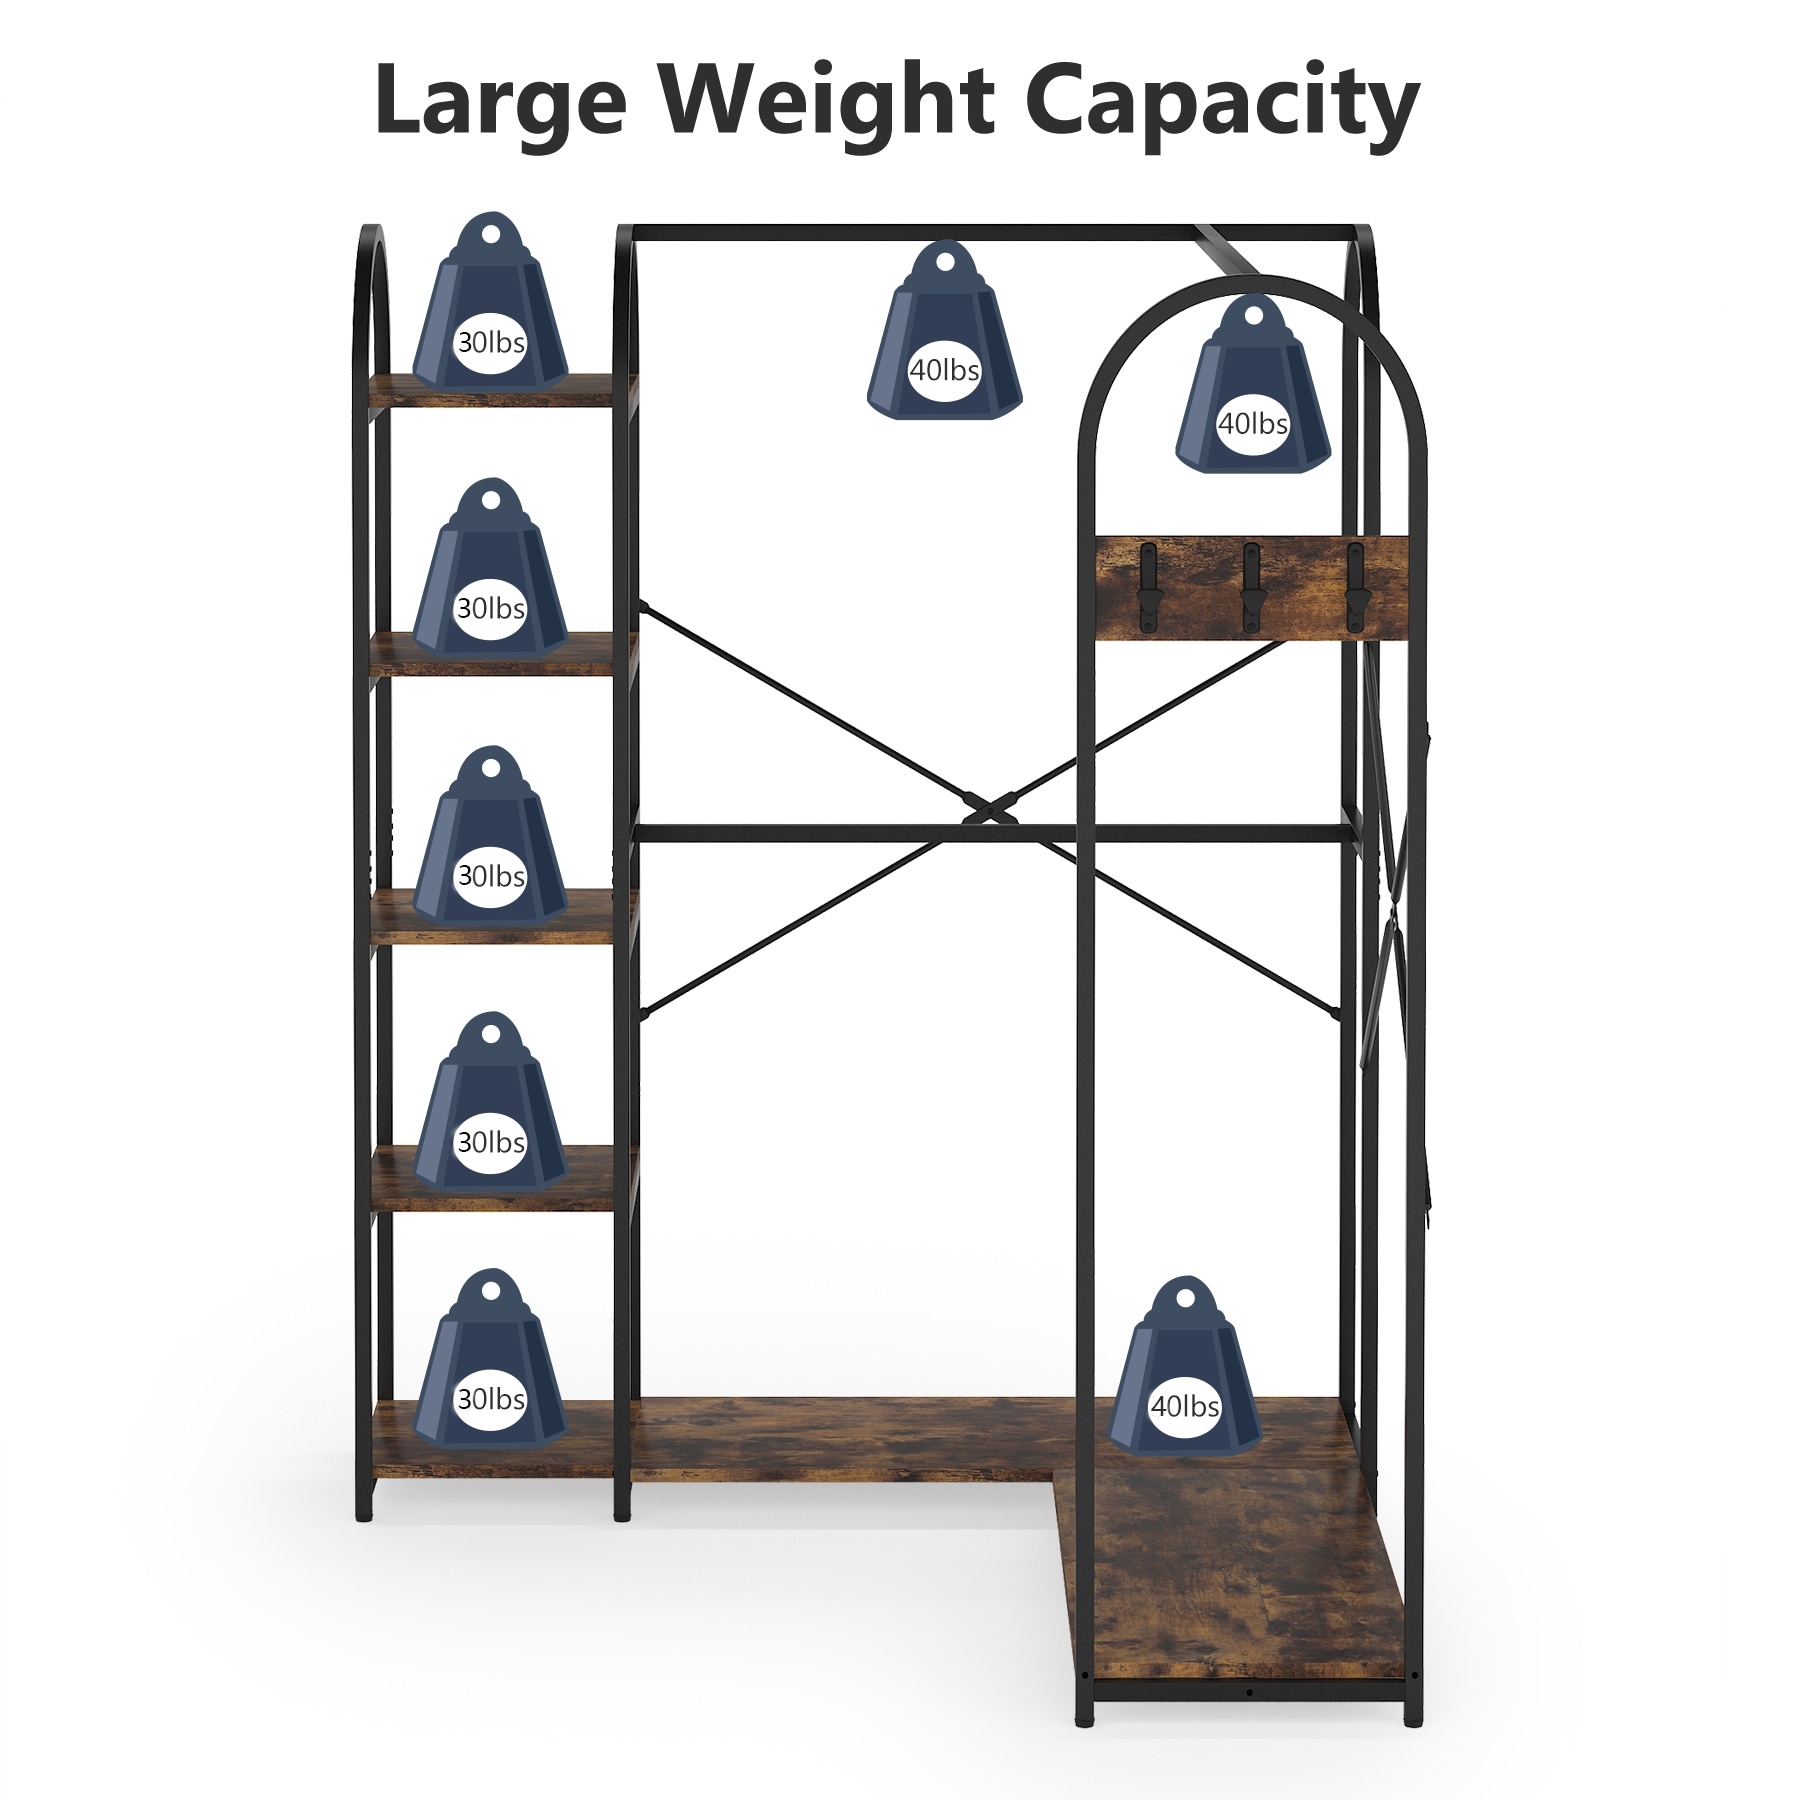 https://ak1.ostkcdn.com/images/products/is/images/direct/9cbcc6083b41a780e4bc7efea566b93f43d5ae09/Industrial-L-Shaped-Closet-Organizer%2C-Freestanding-Corner-Clothes-Garment-Rack-with-Hanging-Rods-and-Storage-Shelves.jpg